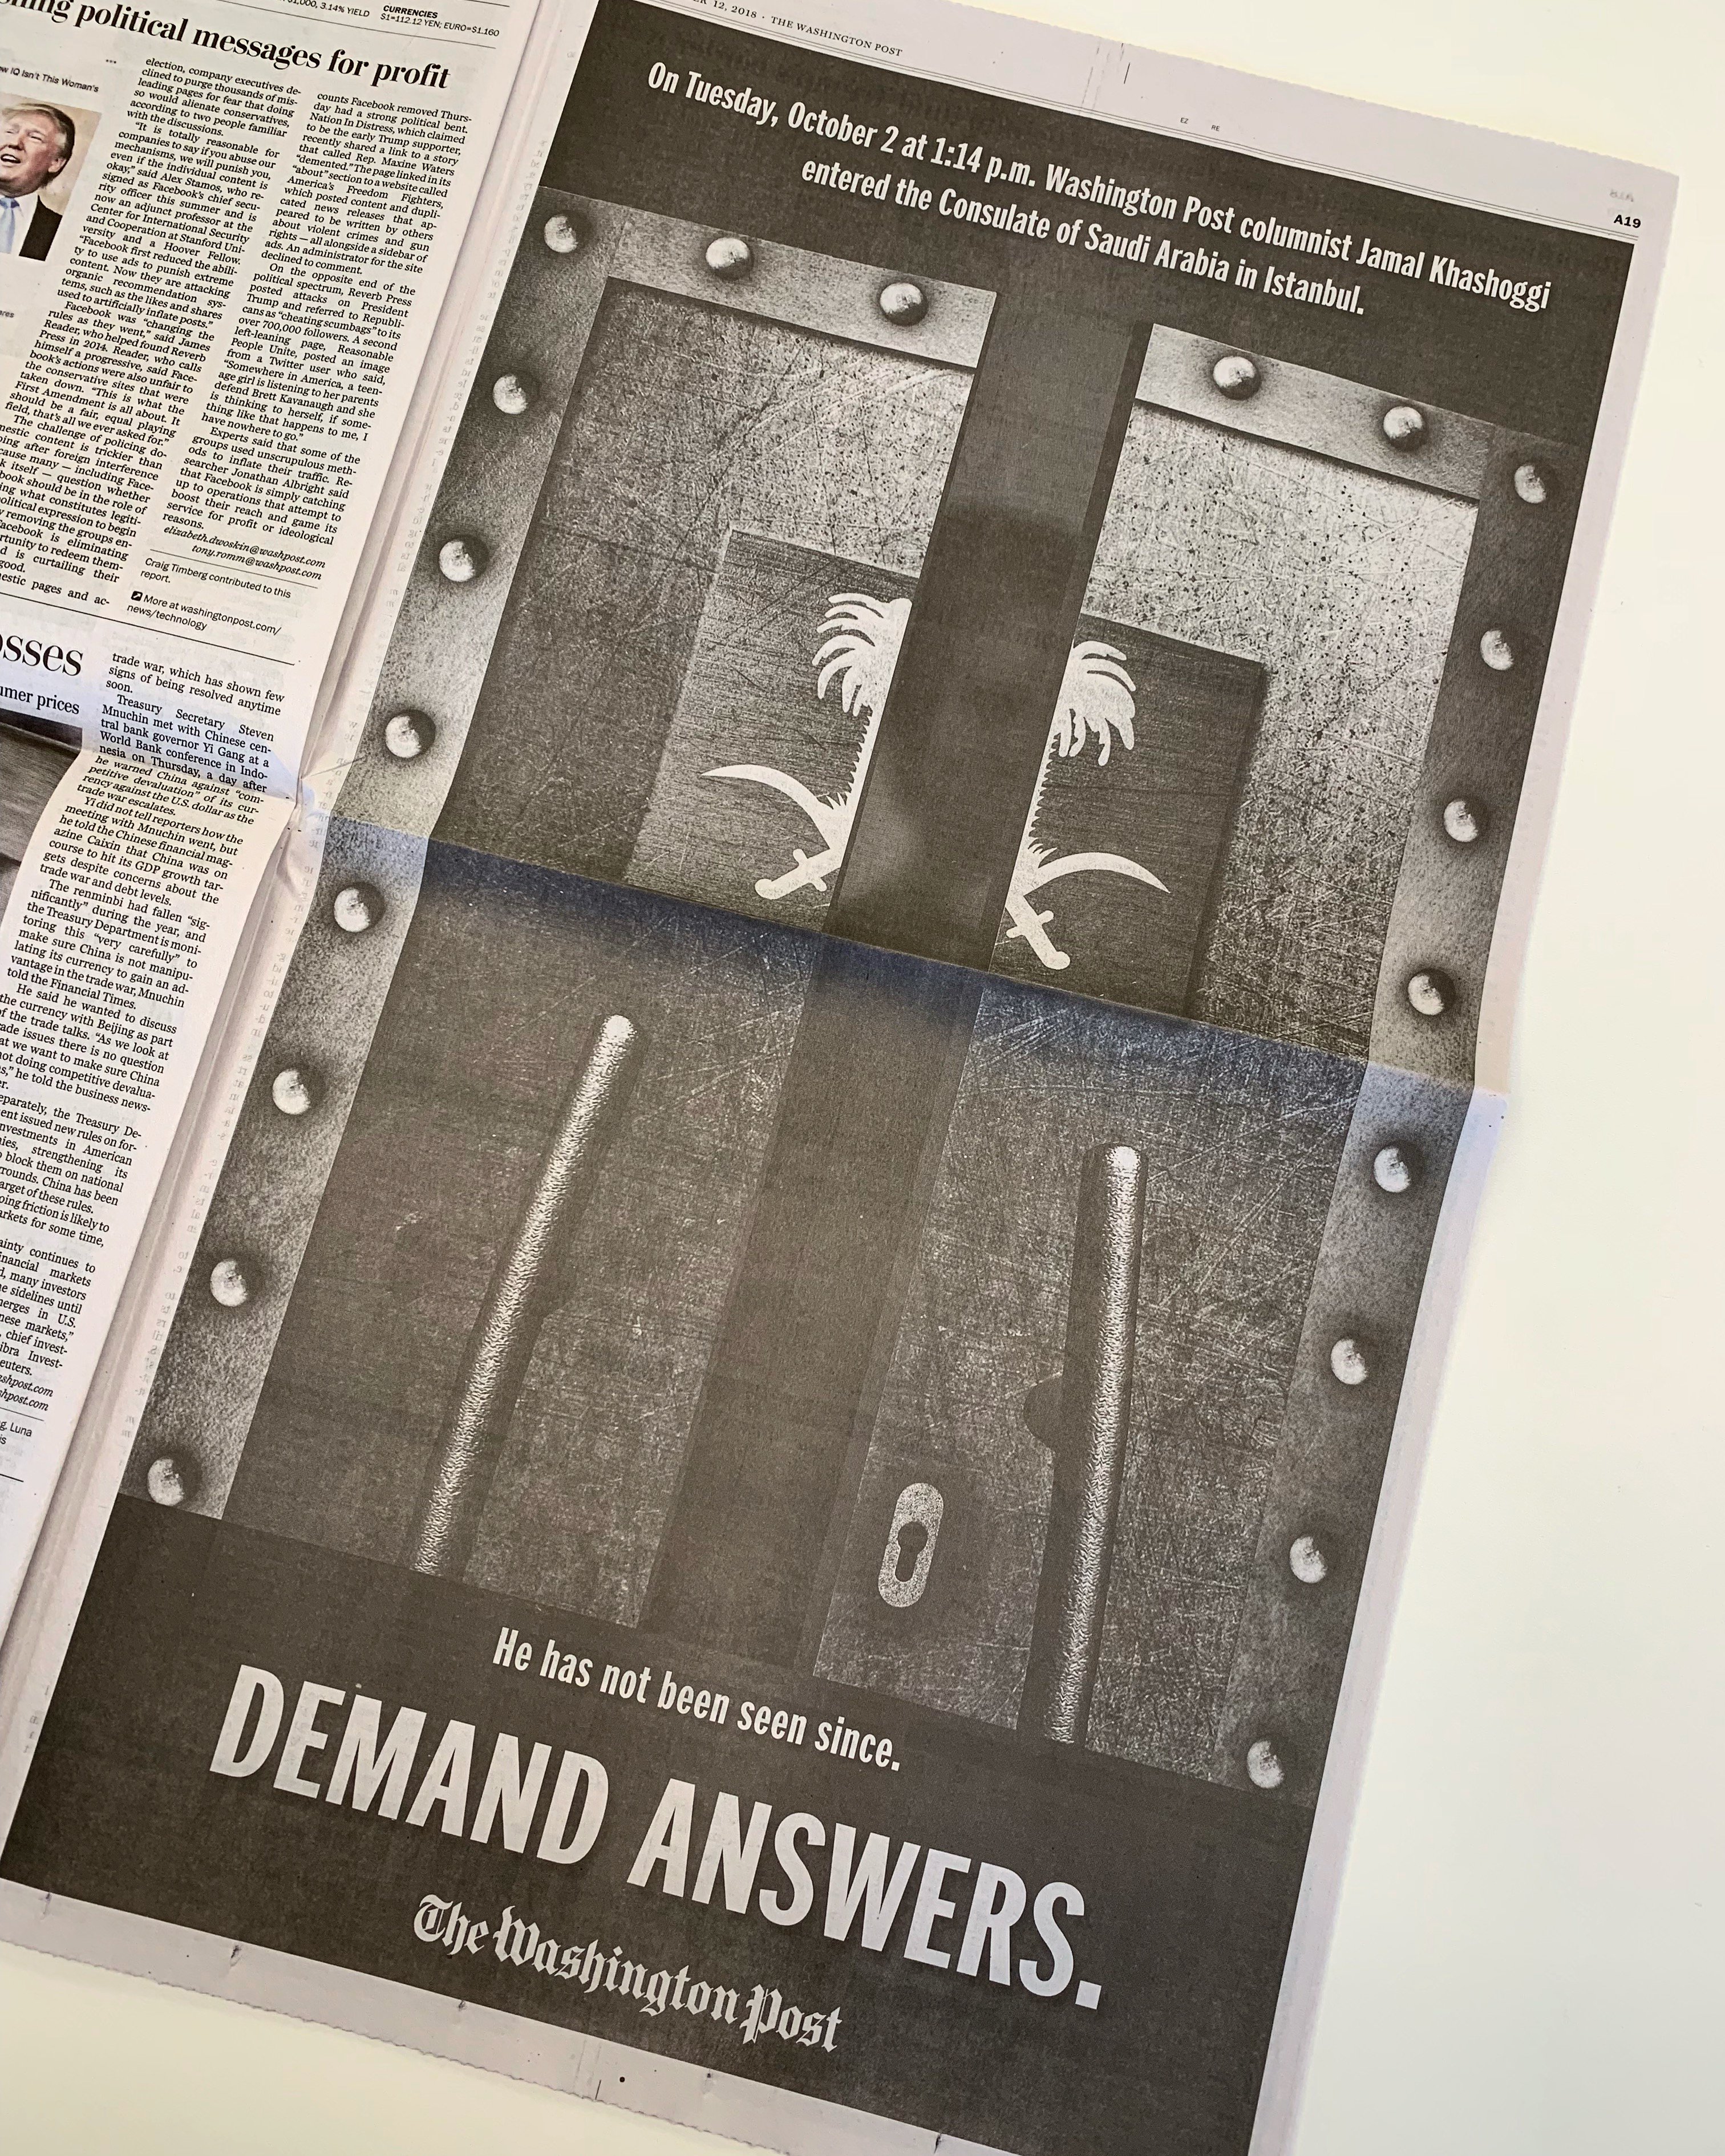 stykke Penneven Plantation The Washington Post on Twitter: "In today's print edition, a full-page ad  demanding answers on the disappearance and apparent murder of contributing  Post columnist Jamal Khashoggi. You can read his columns for